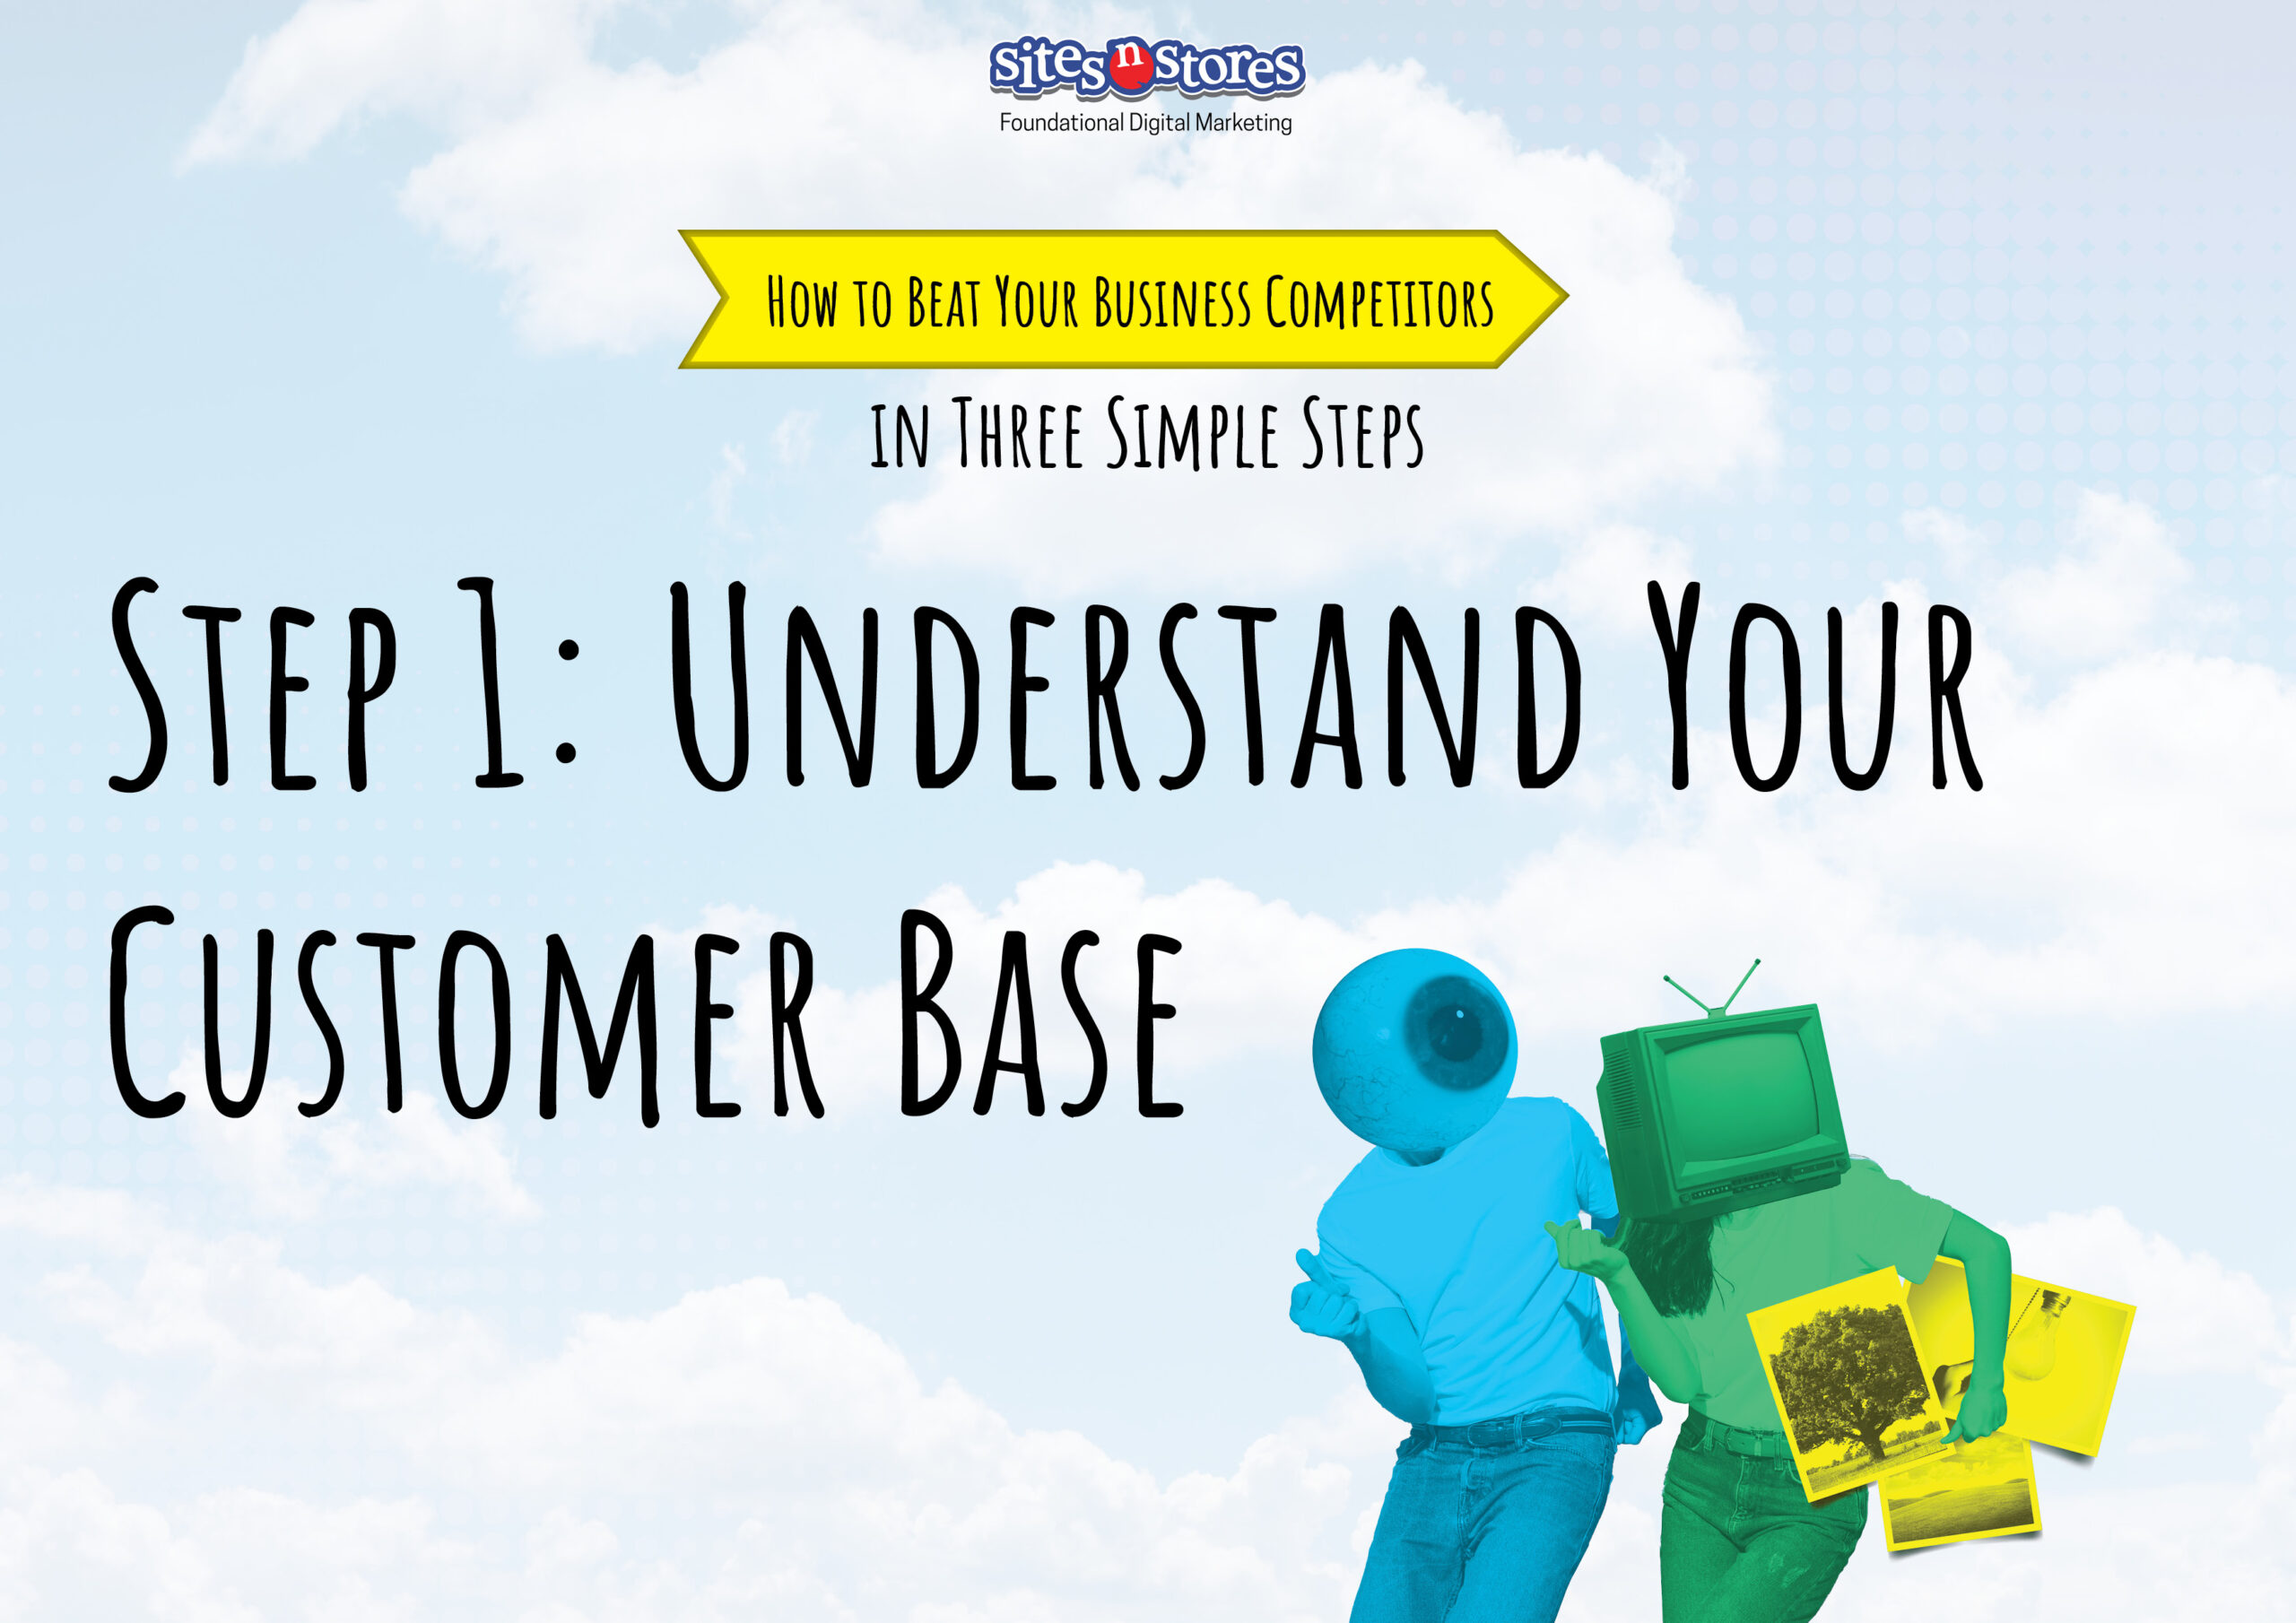 Step 1: Understand Your Customer Base